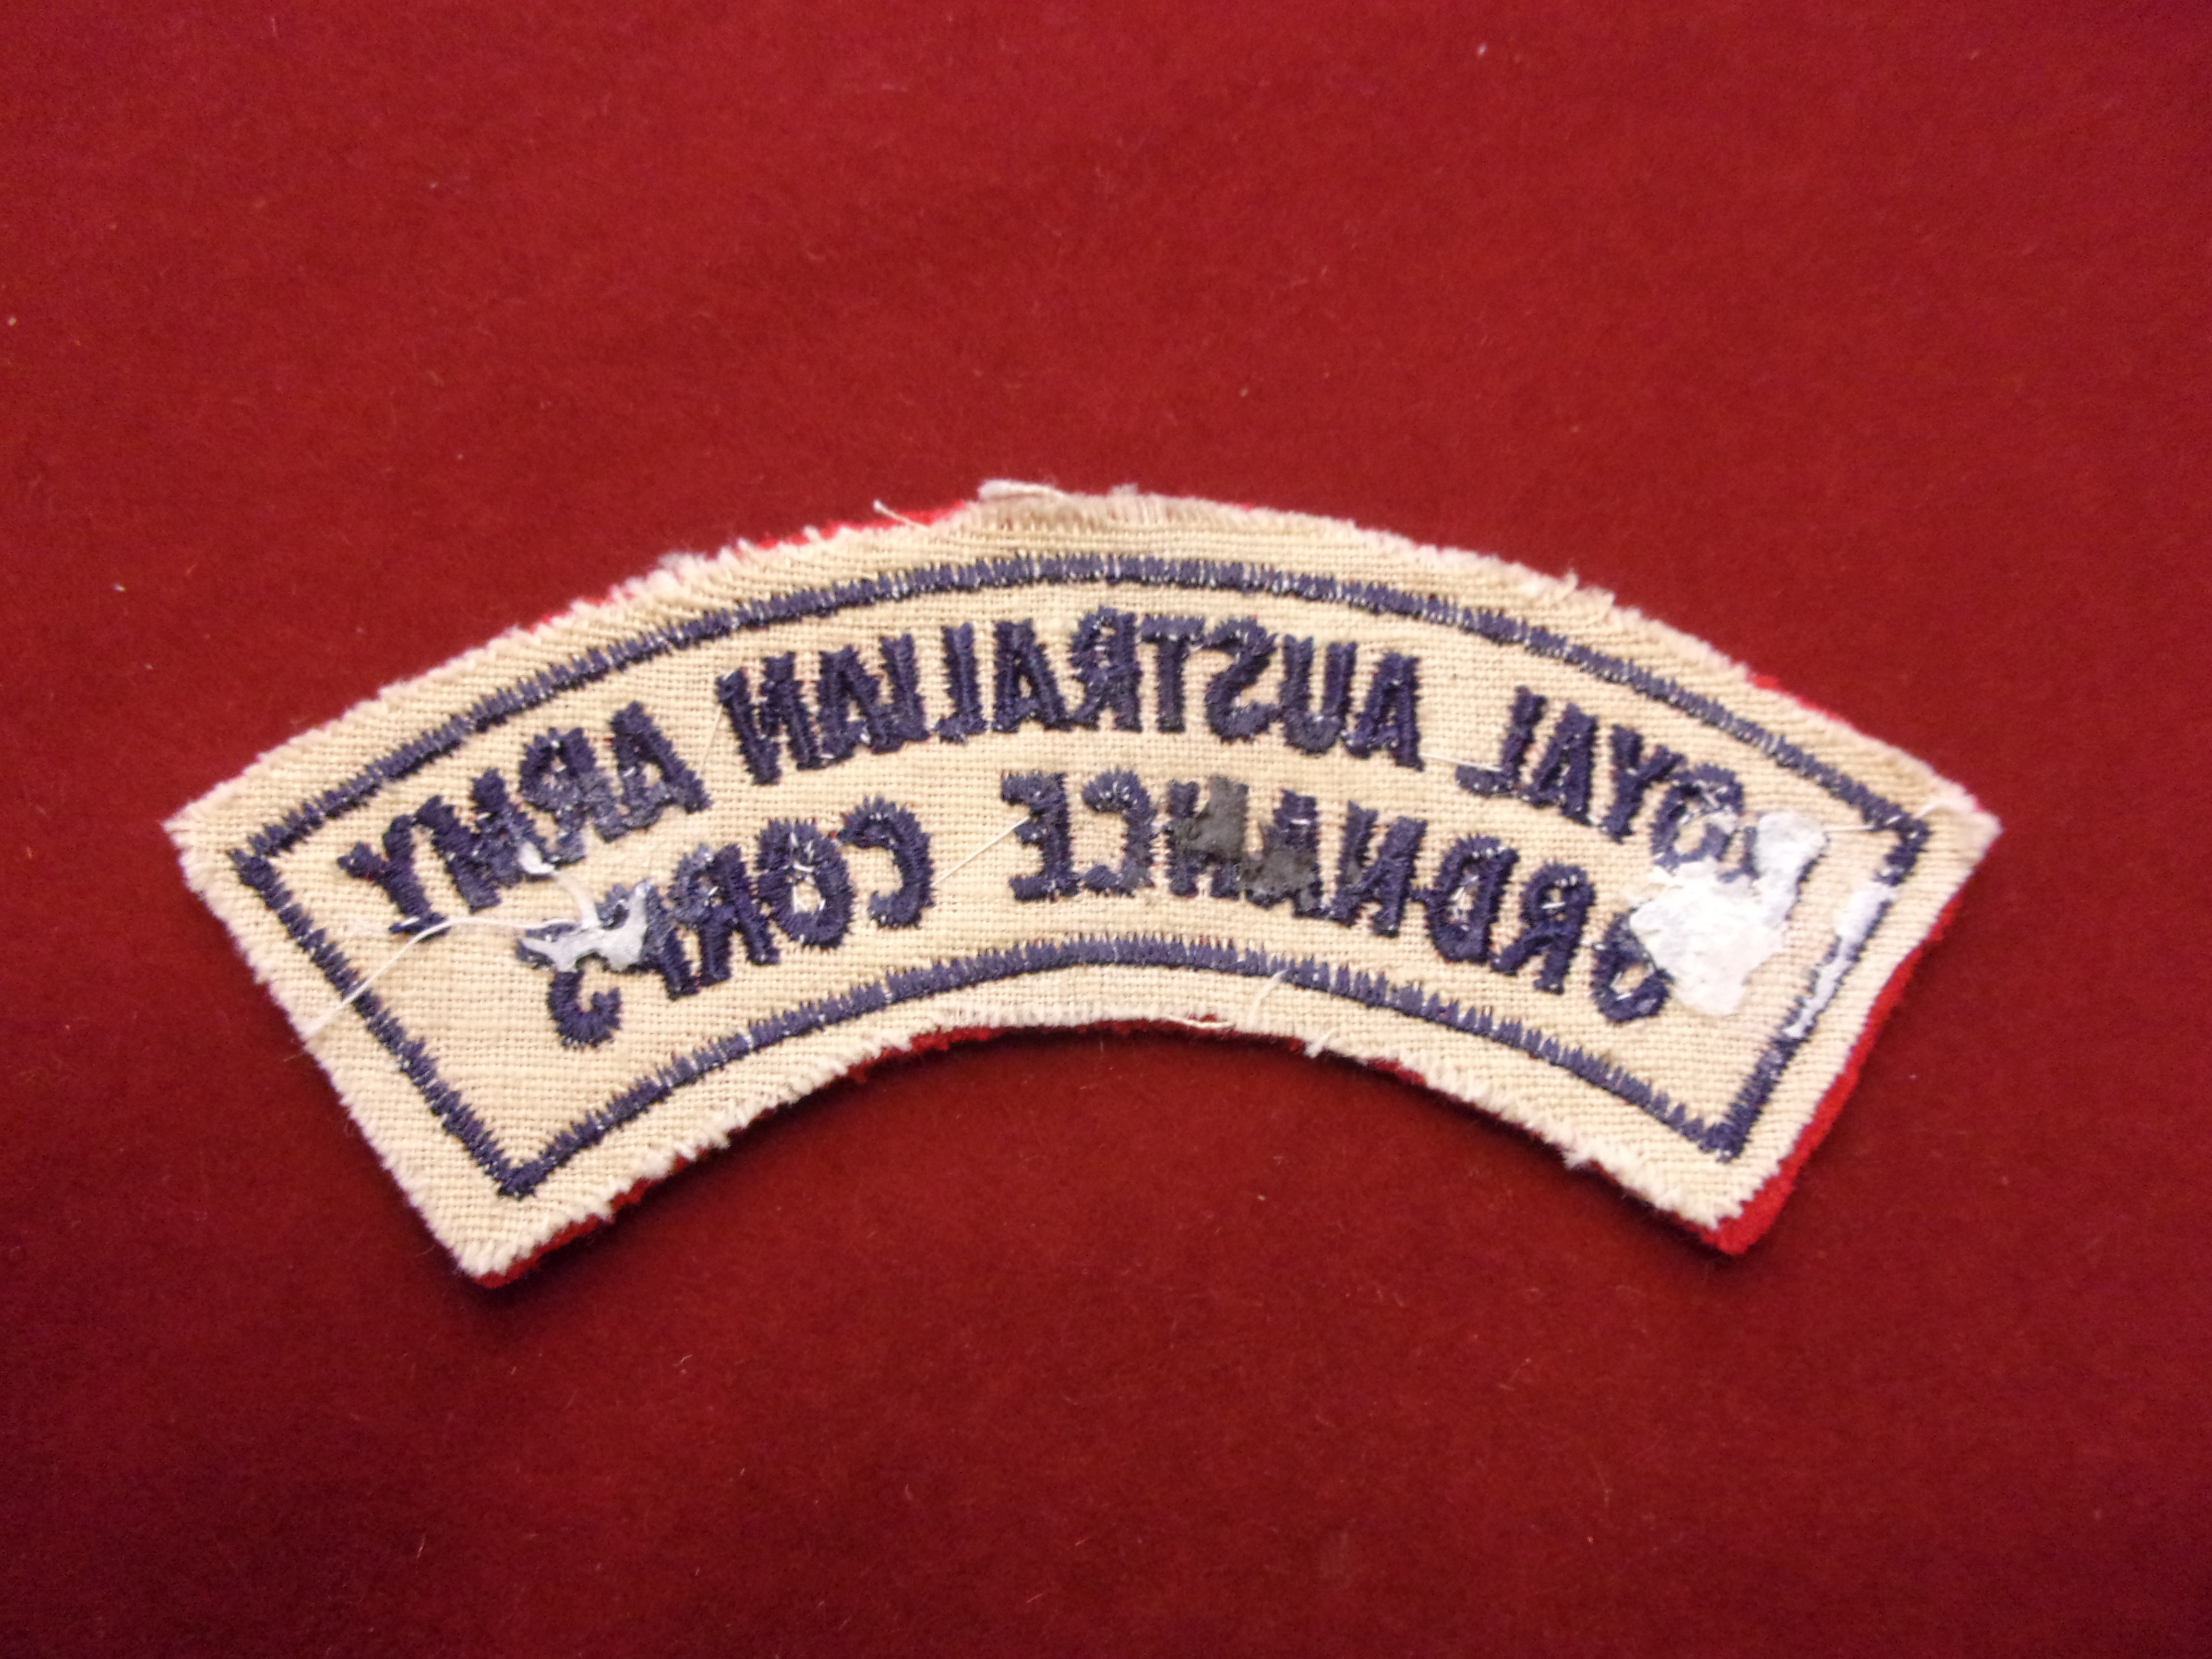 Australian Royal Army Ordnance Corps cloth shoulder title, blue on red - Image 2 of 3